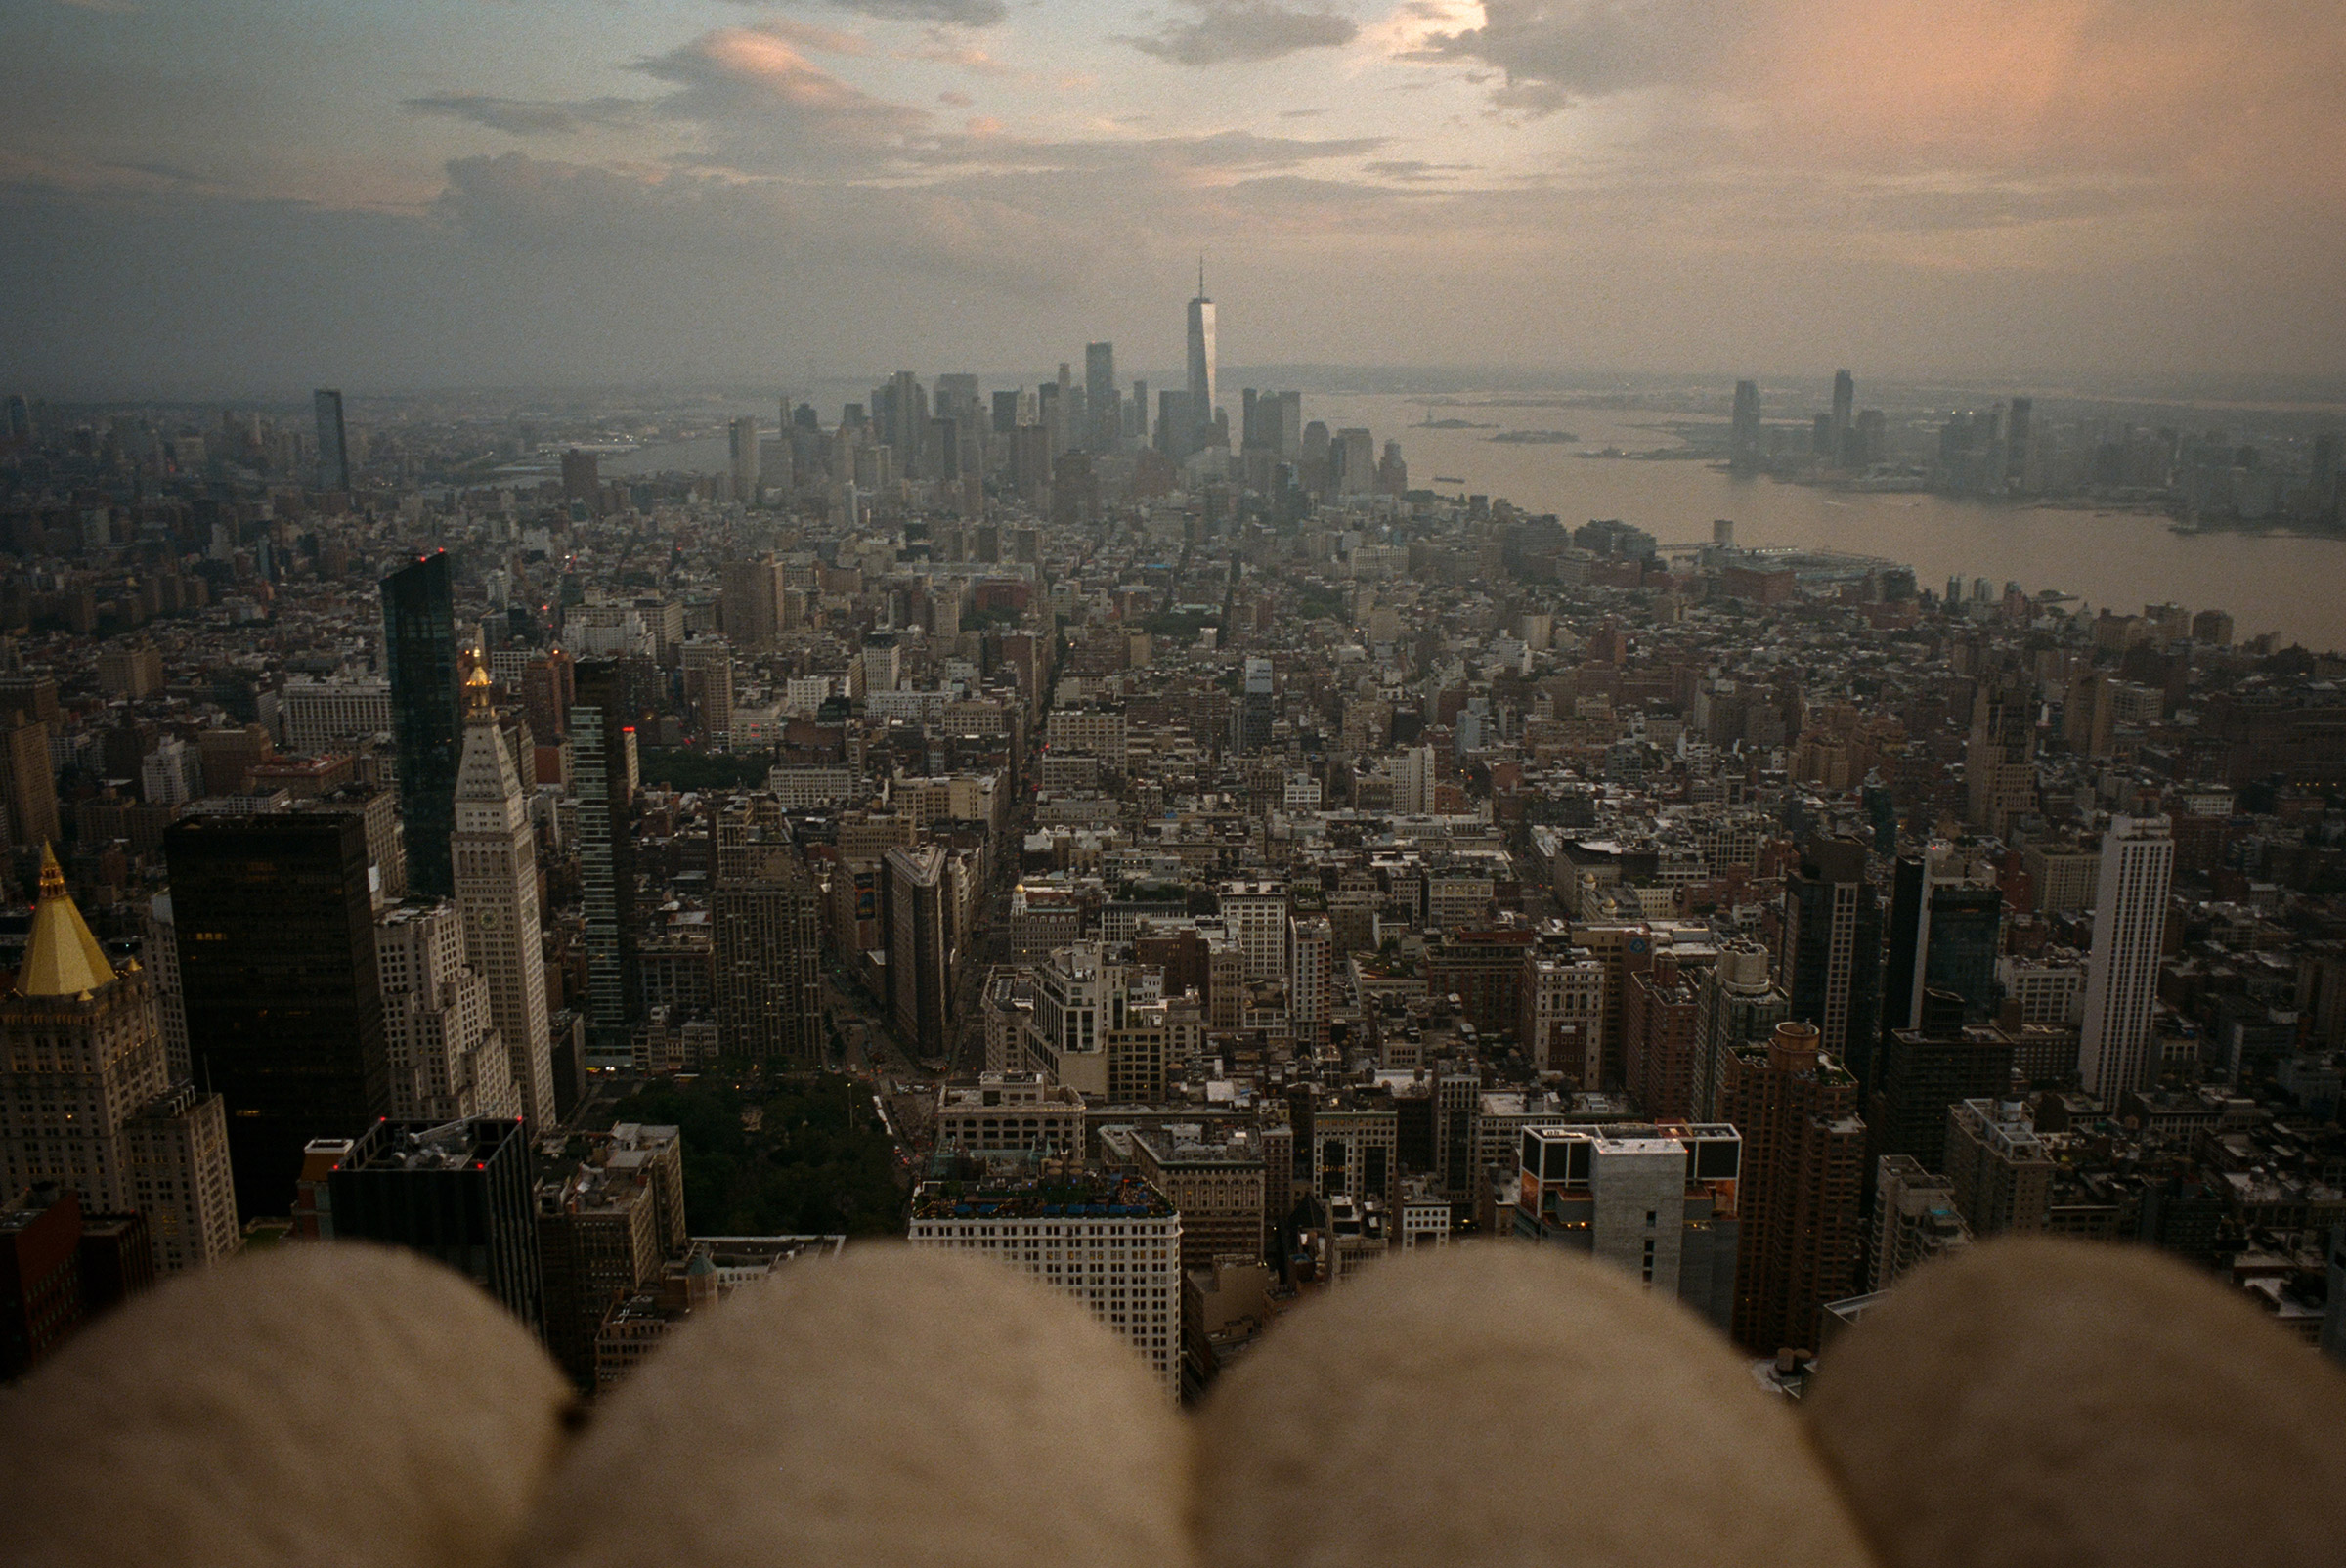 Looking south from the top of the Empire State Building at sunset, Sept. 1, 2021. (Daniel Arnold for TIME)